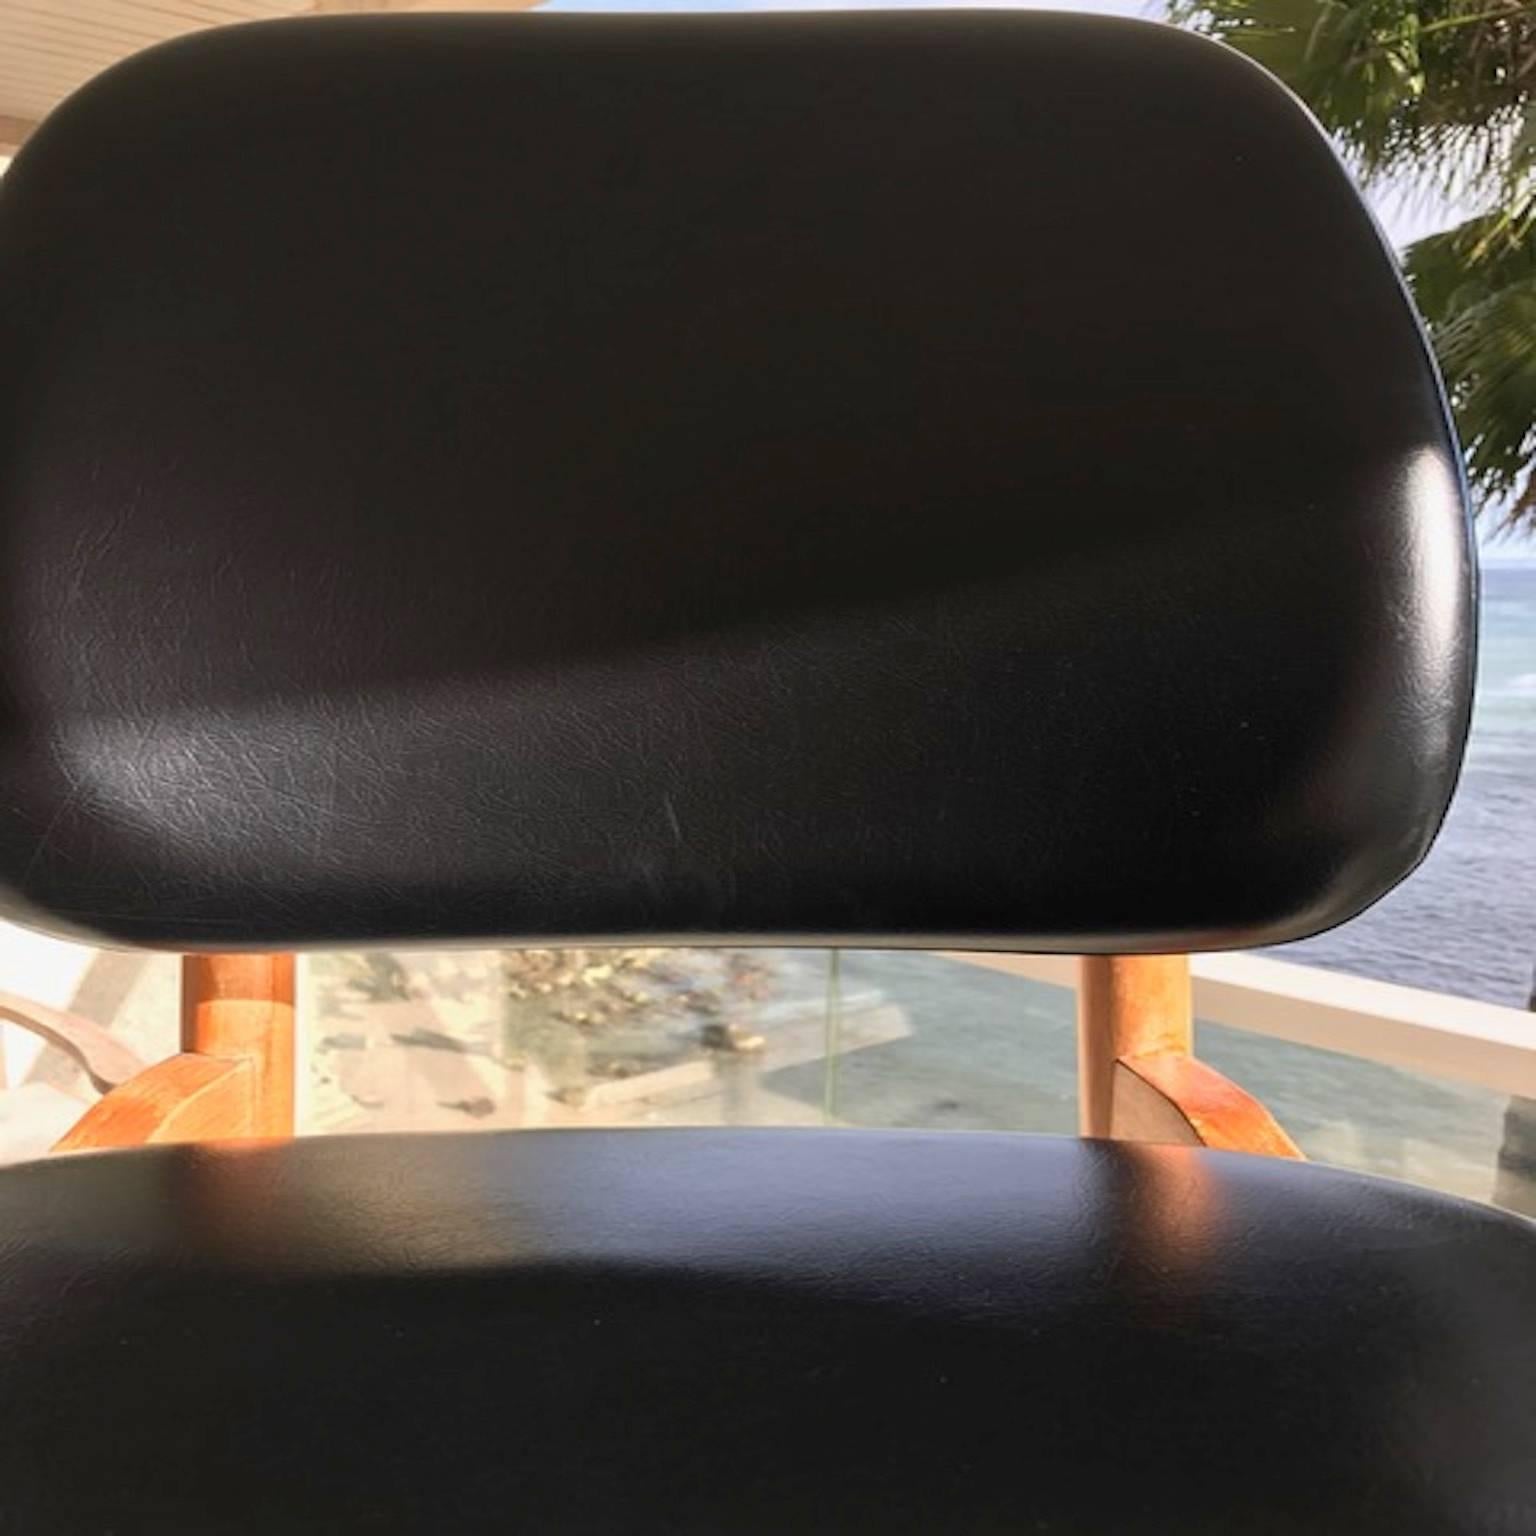 
These elegant chairs made of wood maple and Naugahyde (a brand of synthetic leather) are in very good vintage condition.
Their dimensions are 
33.46 in. H x 16.54 in. W x 19.68 in. D
84 cm H x 41 cm W x 50 cm D


